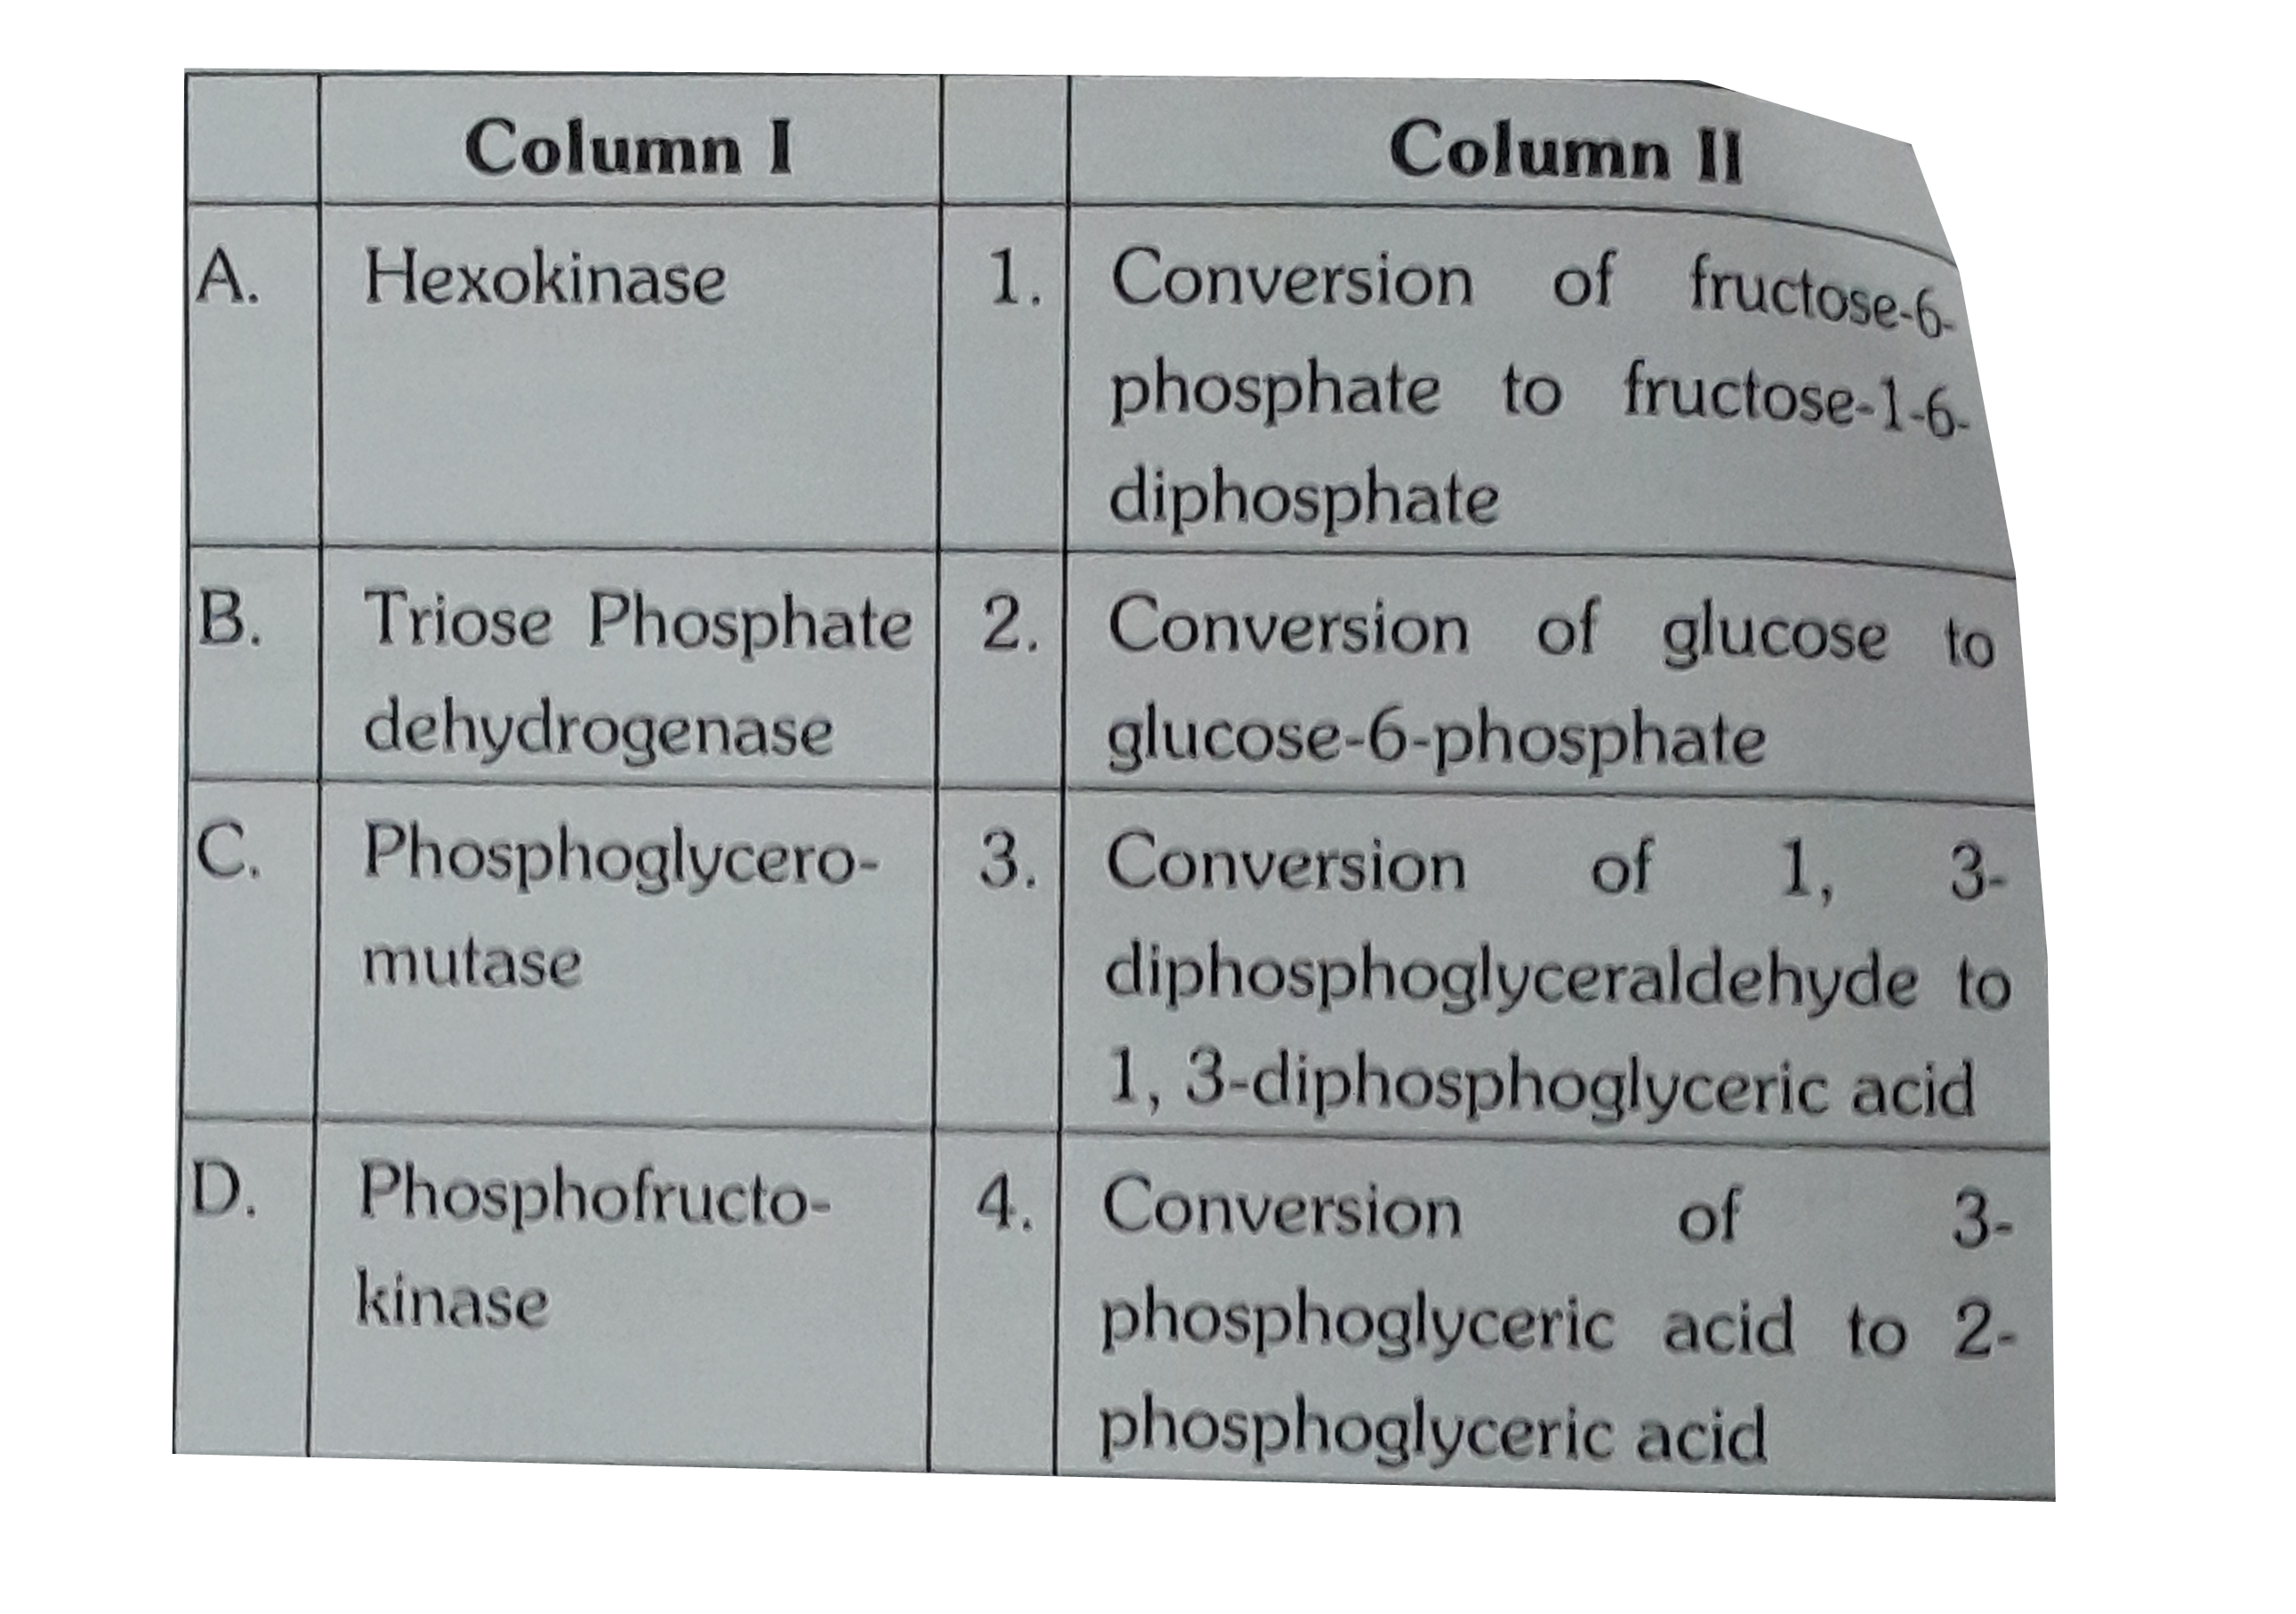 Colum I contains some enzymes and Column II contains reactions, Match them properly and choose the right answer